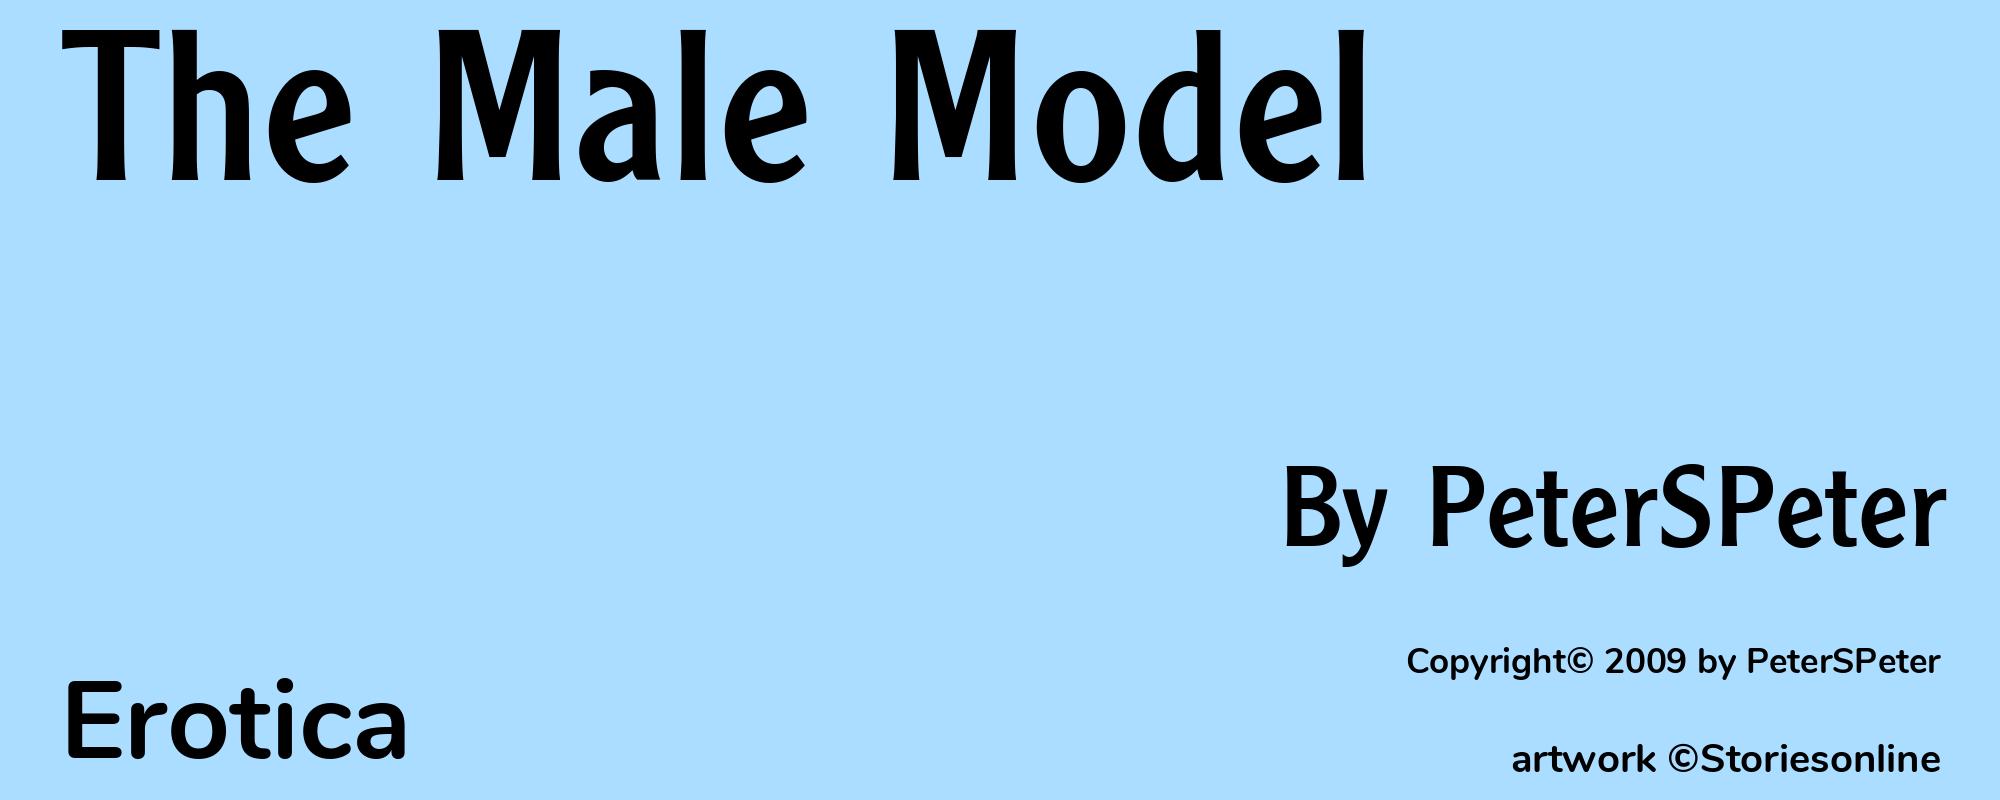 The Male Model - Cover